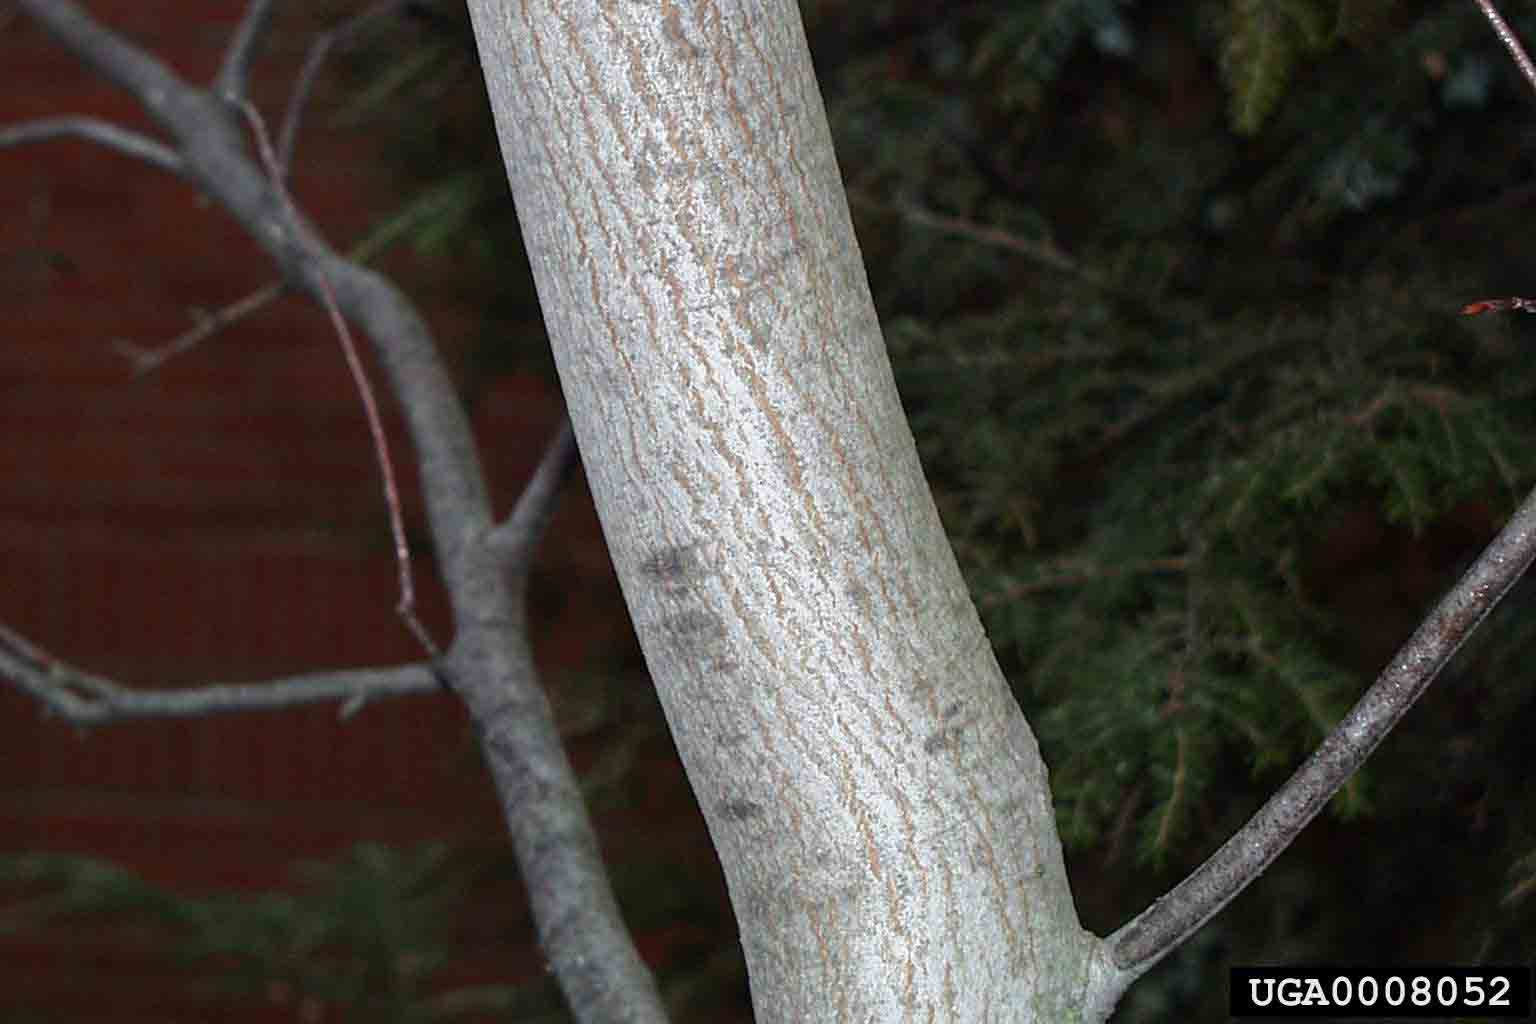 Serviceberry tree, smooth bark and shallow grooves